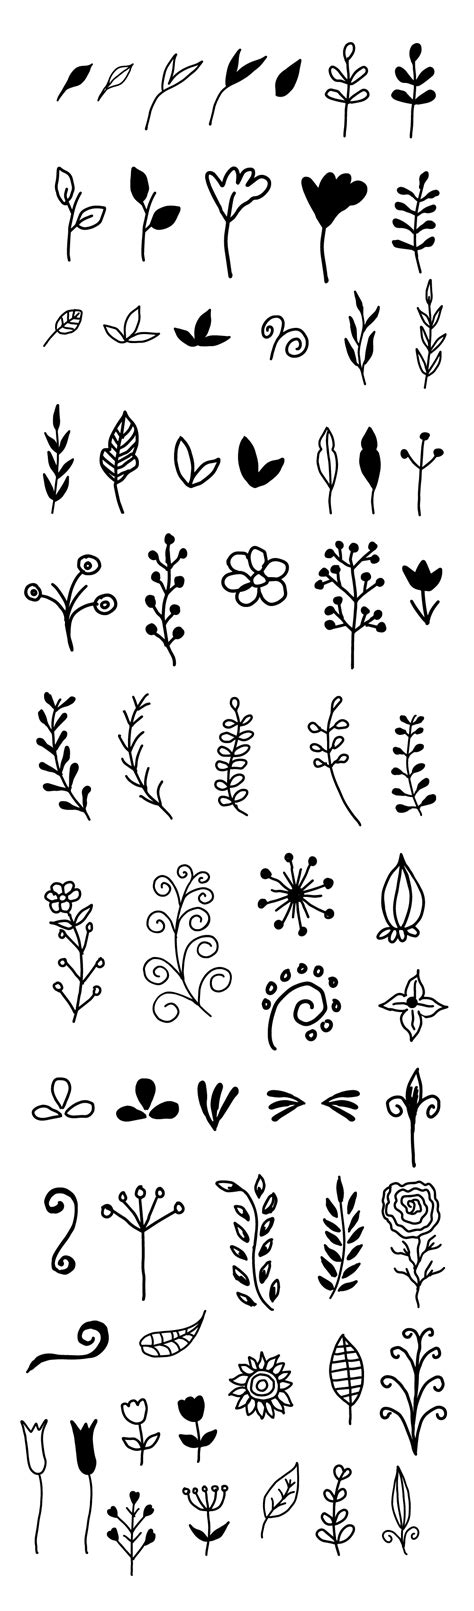 65 Hand Drawn Vector Decorative Floral Elements Graphicsfuel